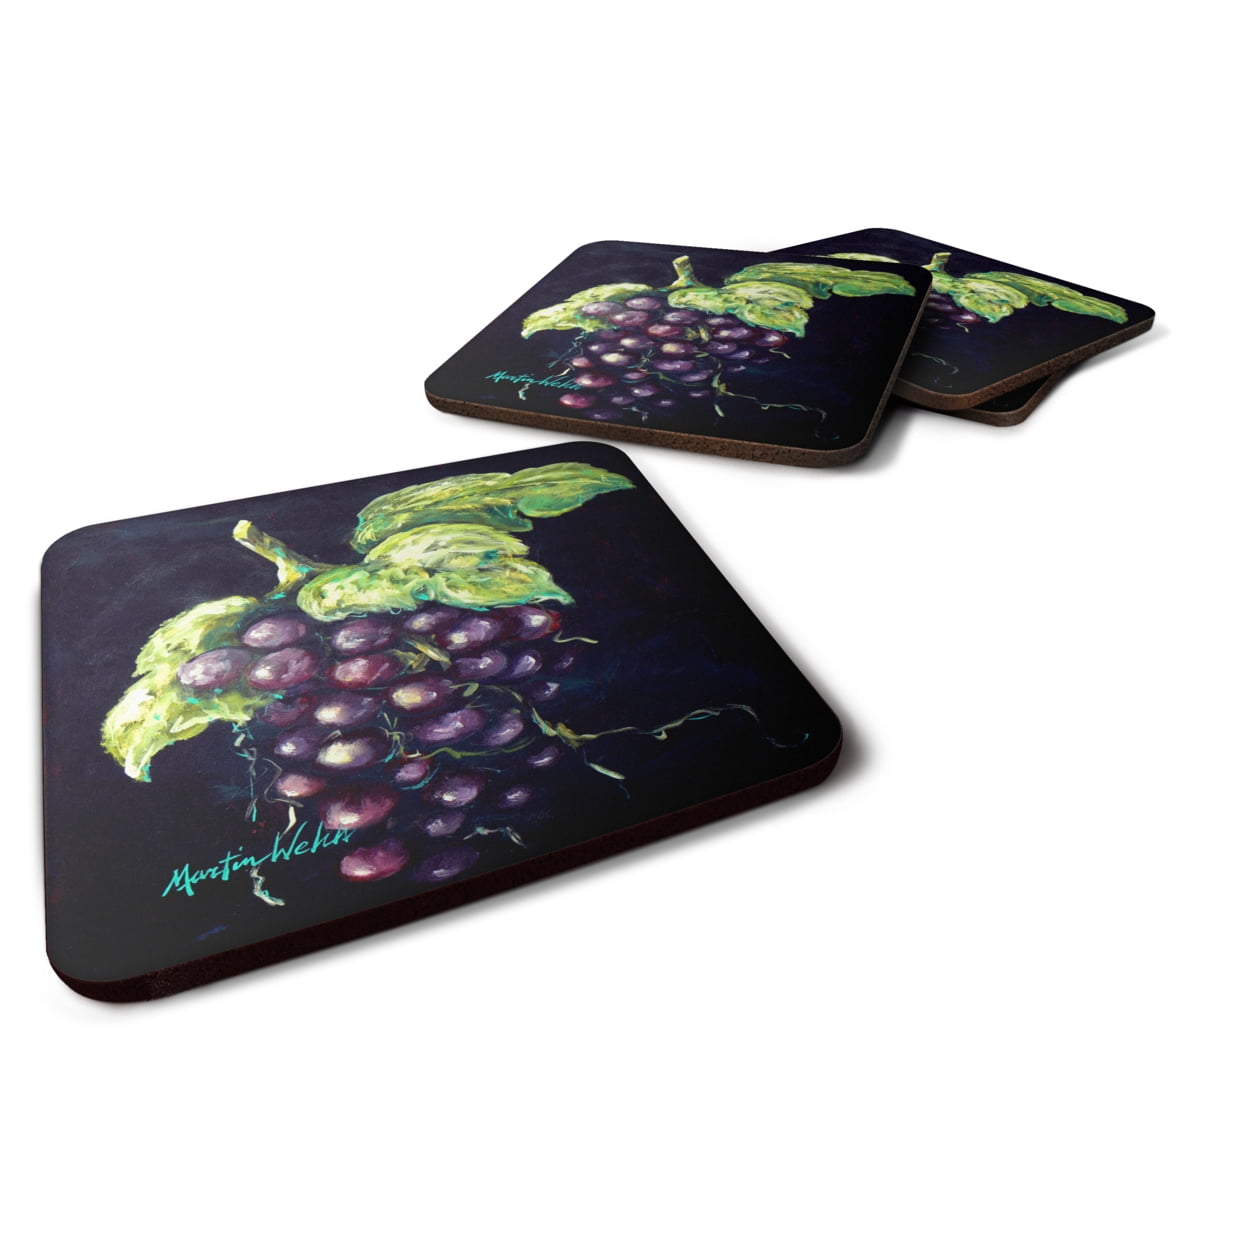 Welchs Grapes Foam Coasters - Set of 4 -  CoolCookware, CO2087441